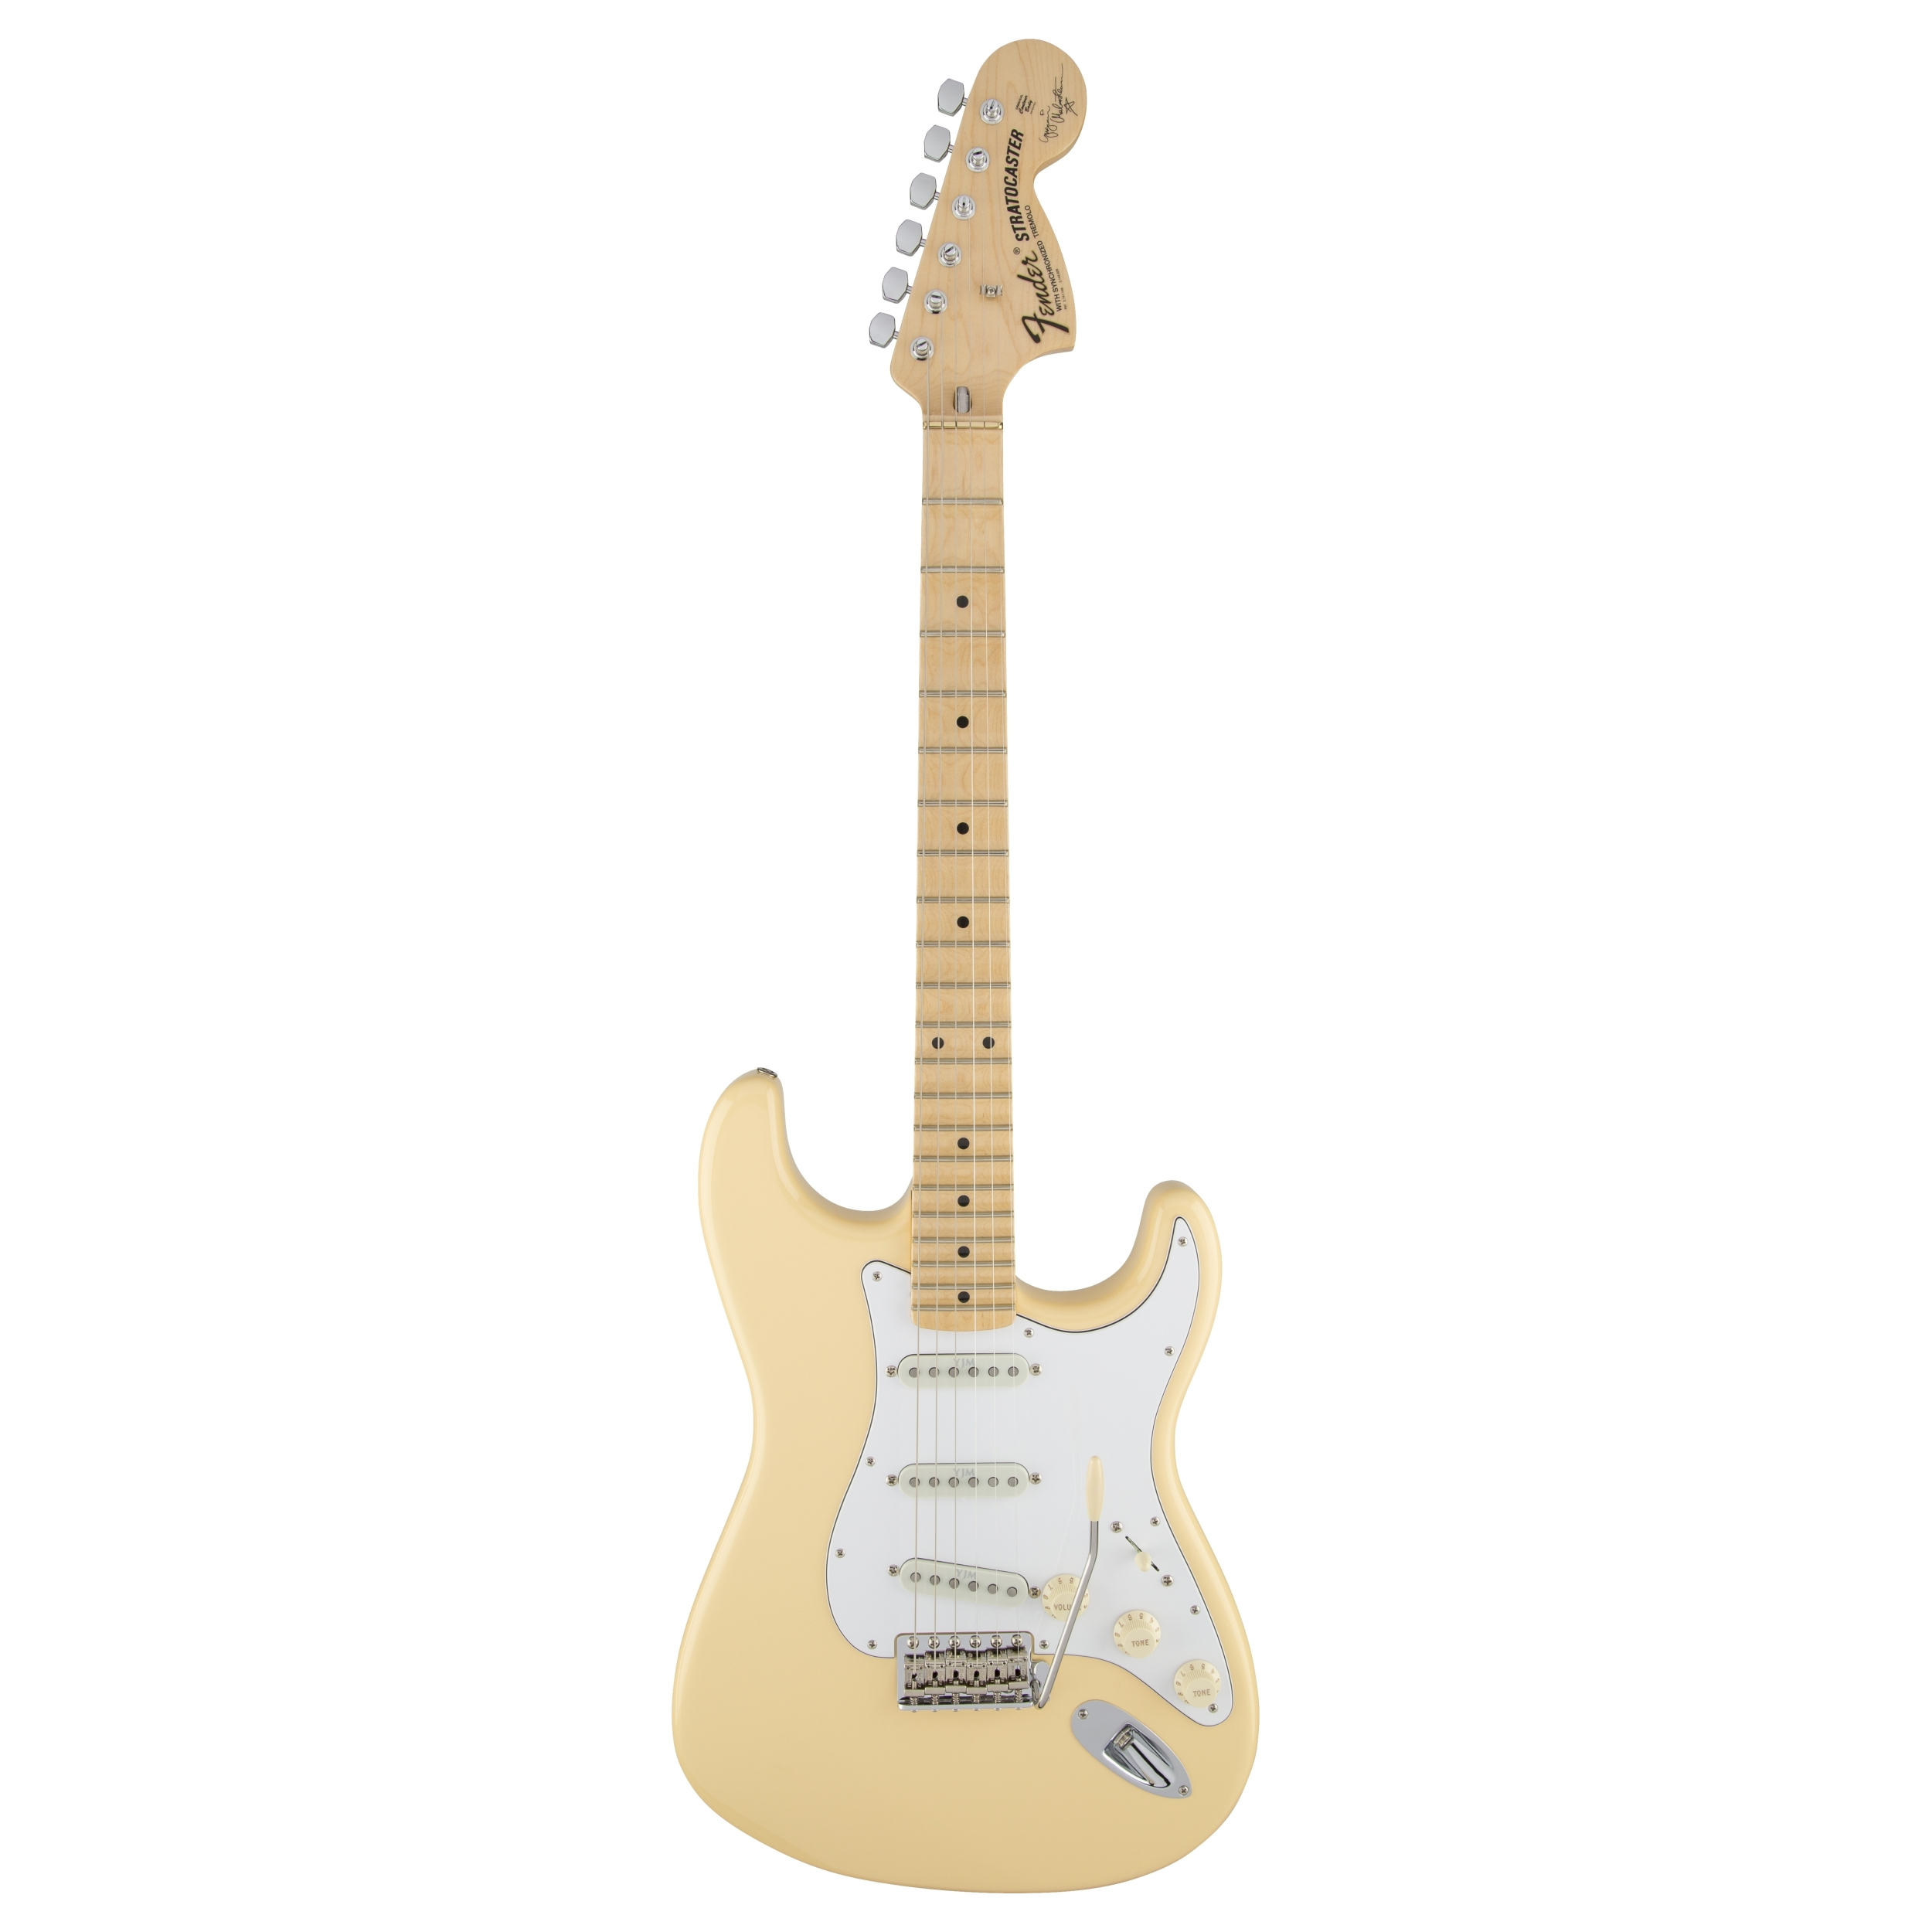 Fender Yngwie Malmsteen Stratocaster®, Scalloped Rosewood Fingerboard, Vintage White